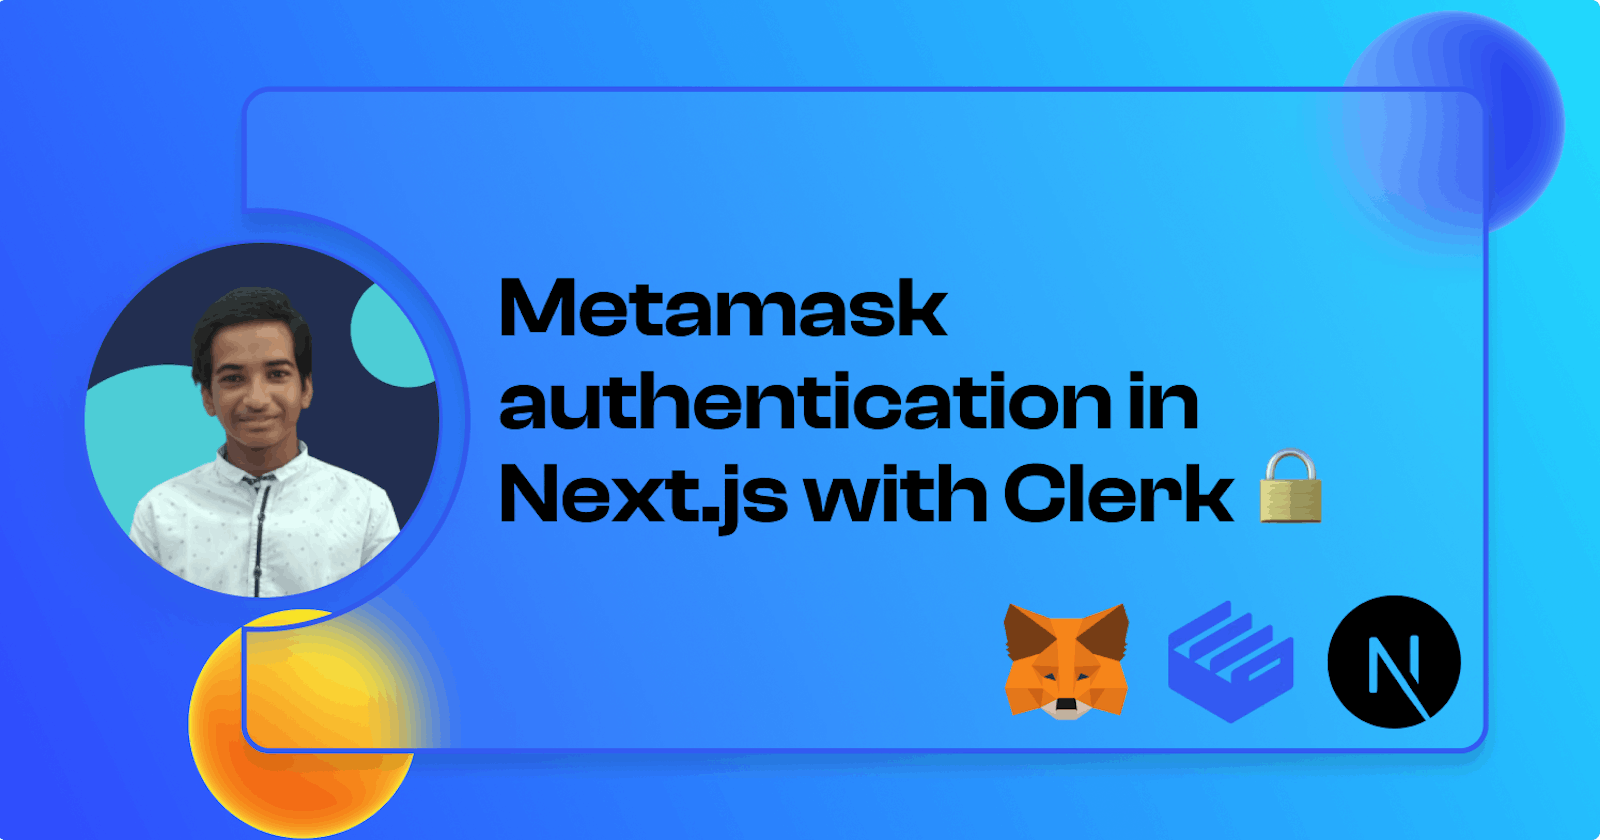 Metamask authentication in Next.js with Clerk 🔒